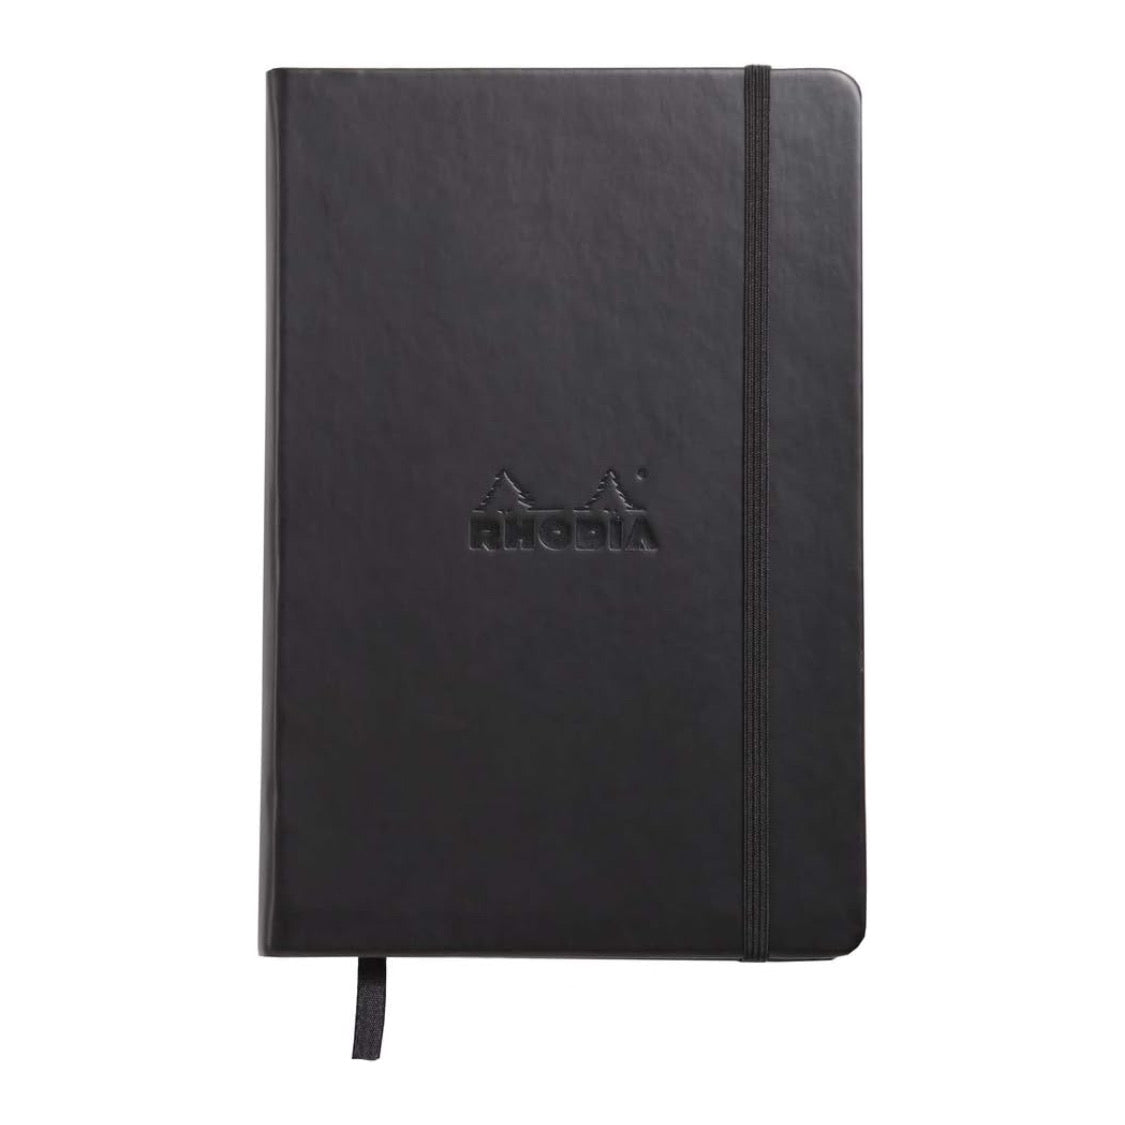 Rhodia Black Meeting Lined Wired Book 14.8 x 21cm (6 1/2 x 8 1/4)